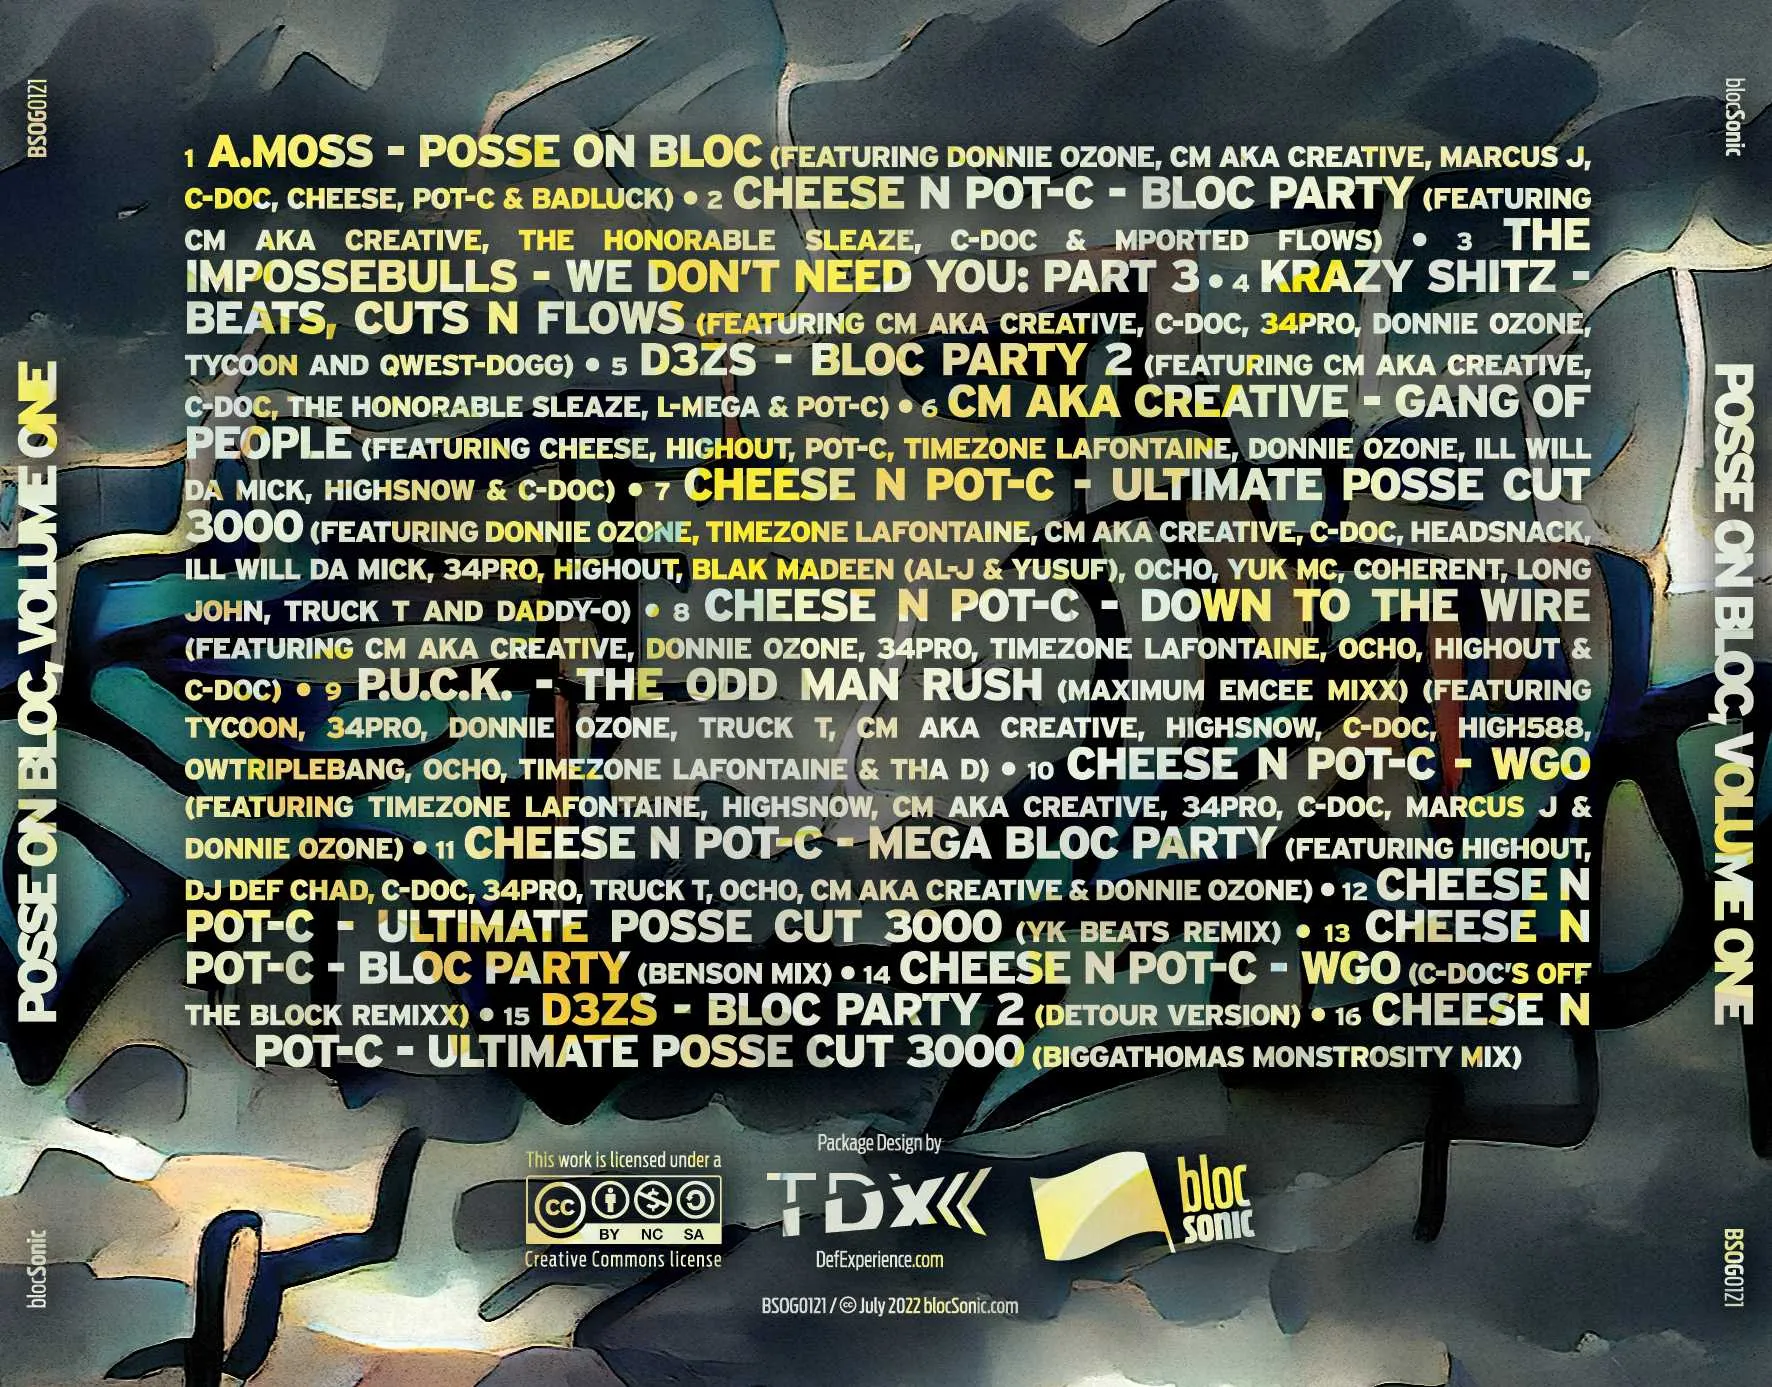 Album traycard for “Posse On Bloc, Volume One (blocSonic Posse Cuts, So Far)” by Various Artists